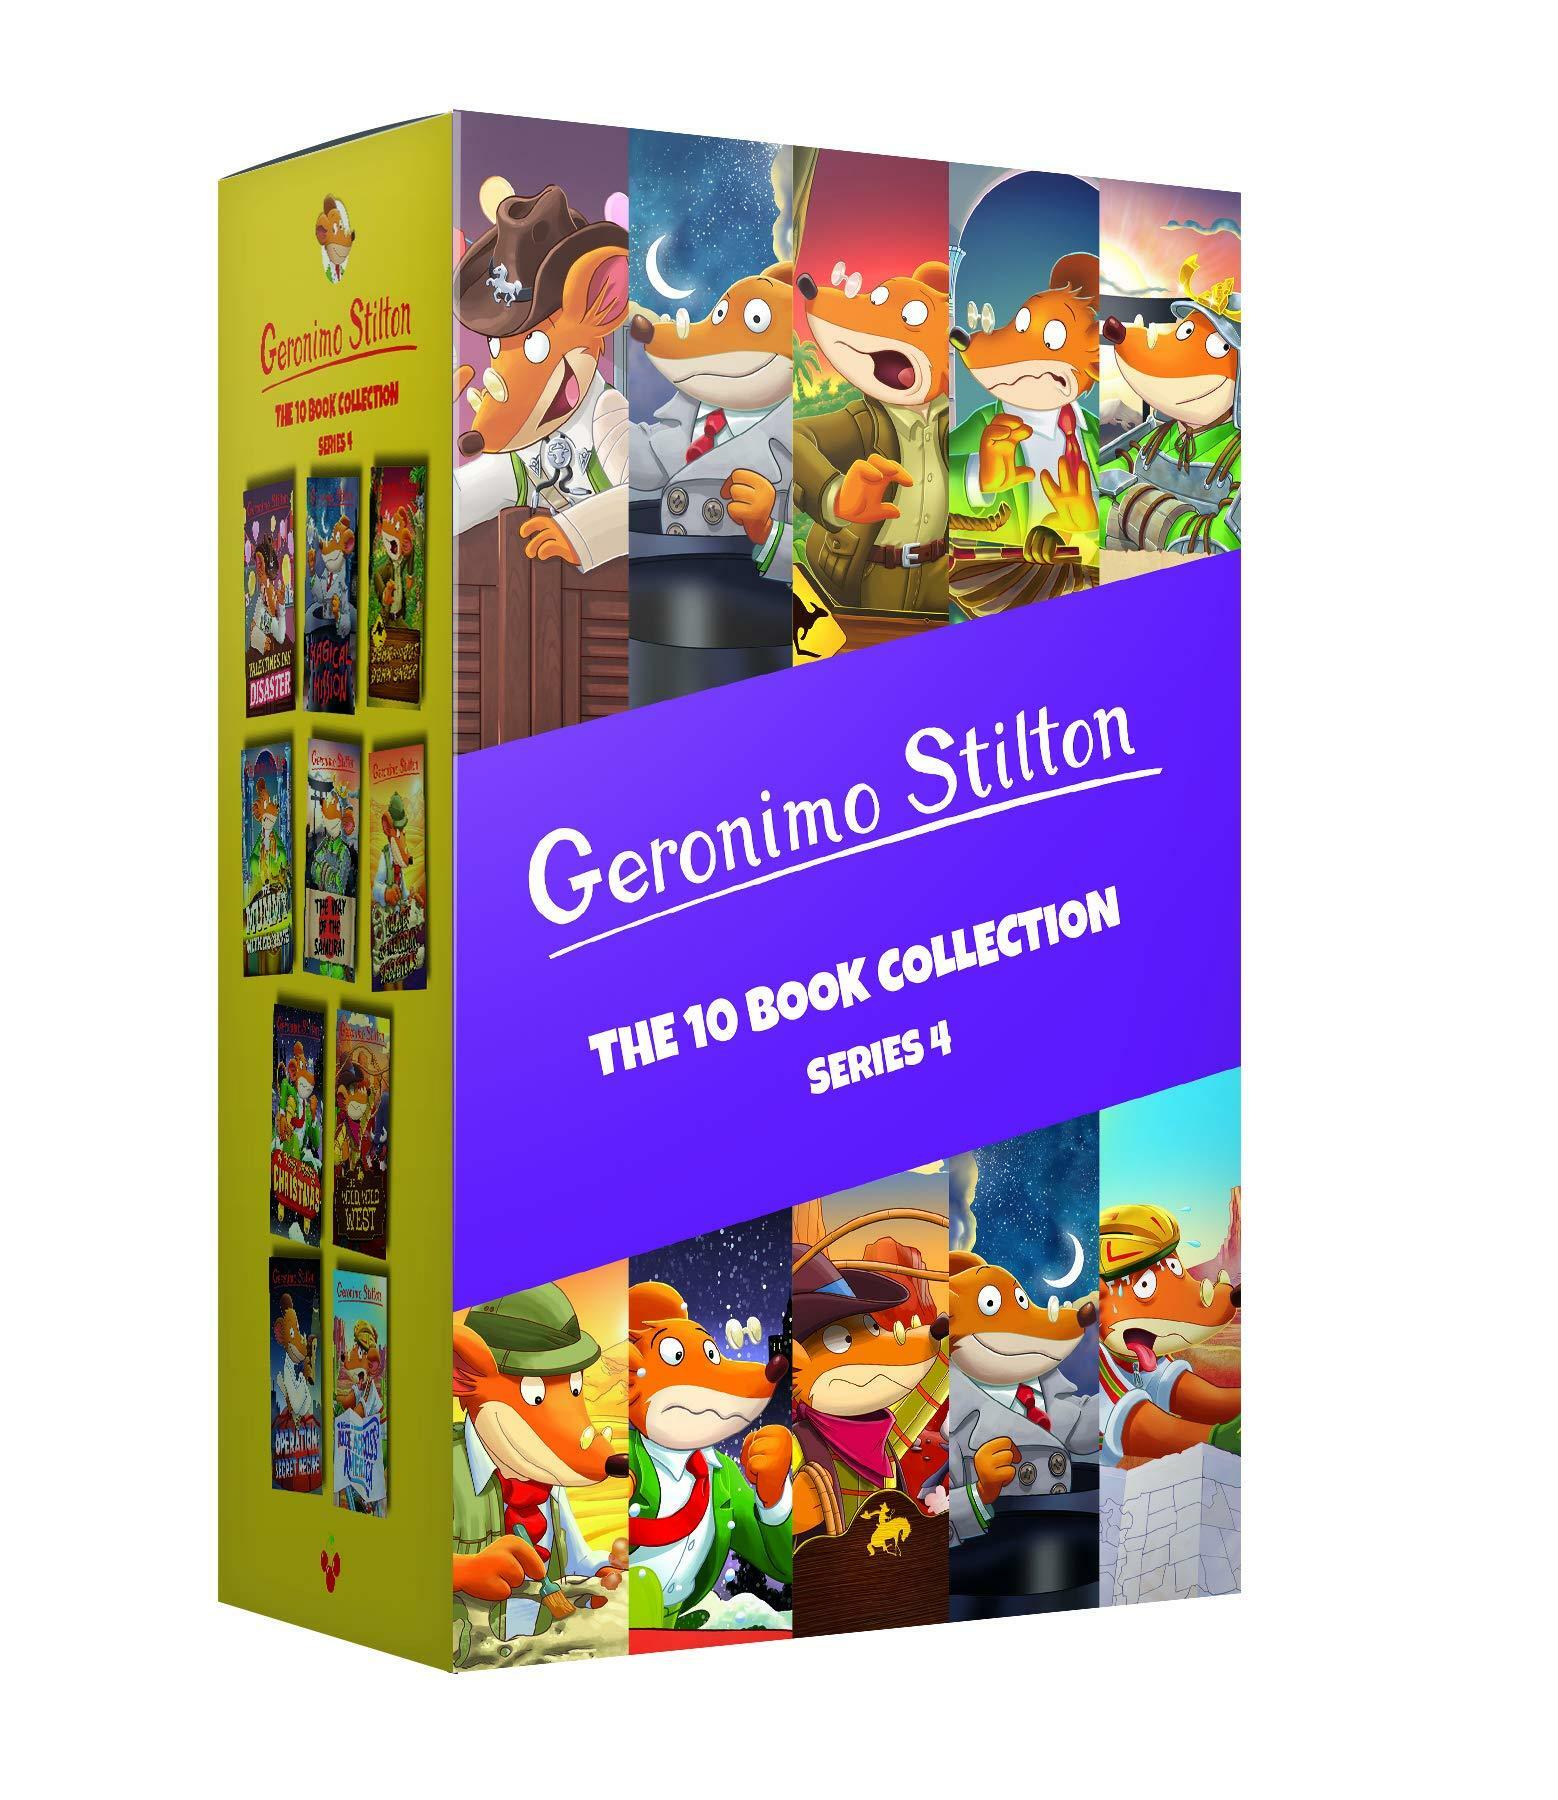 Geronimo Stilton:The 10 Book Collection (Series 4) (Boxed pack)